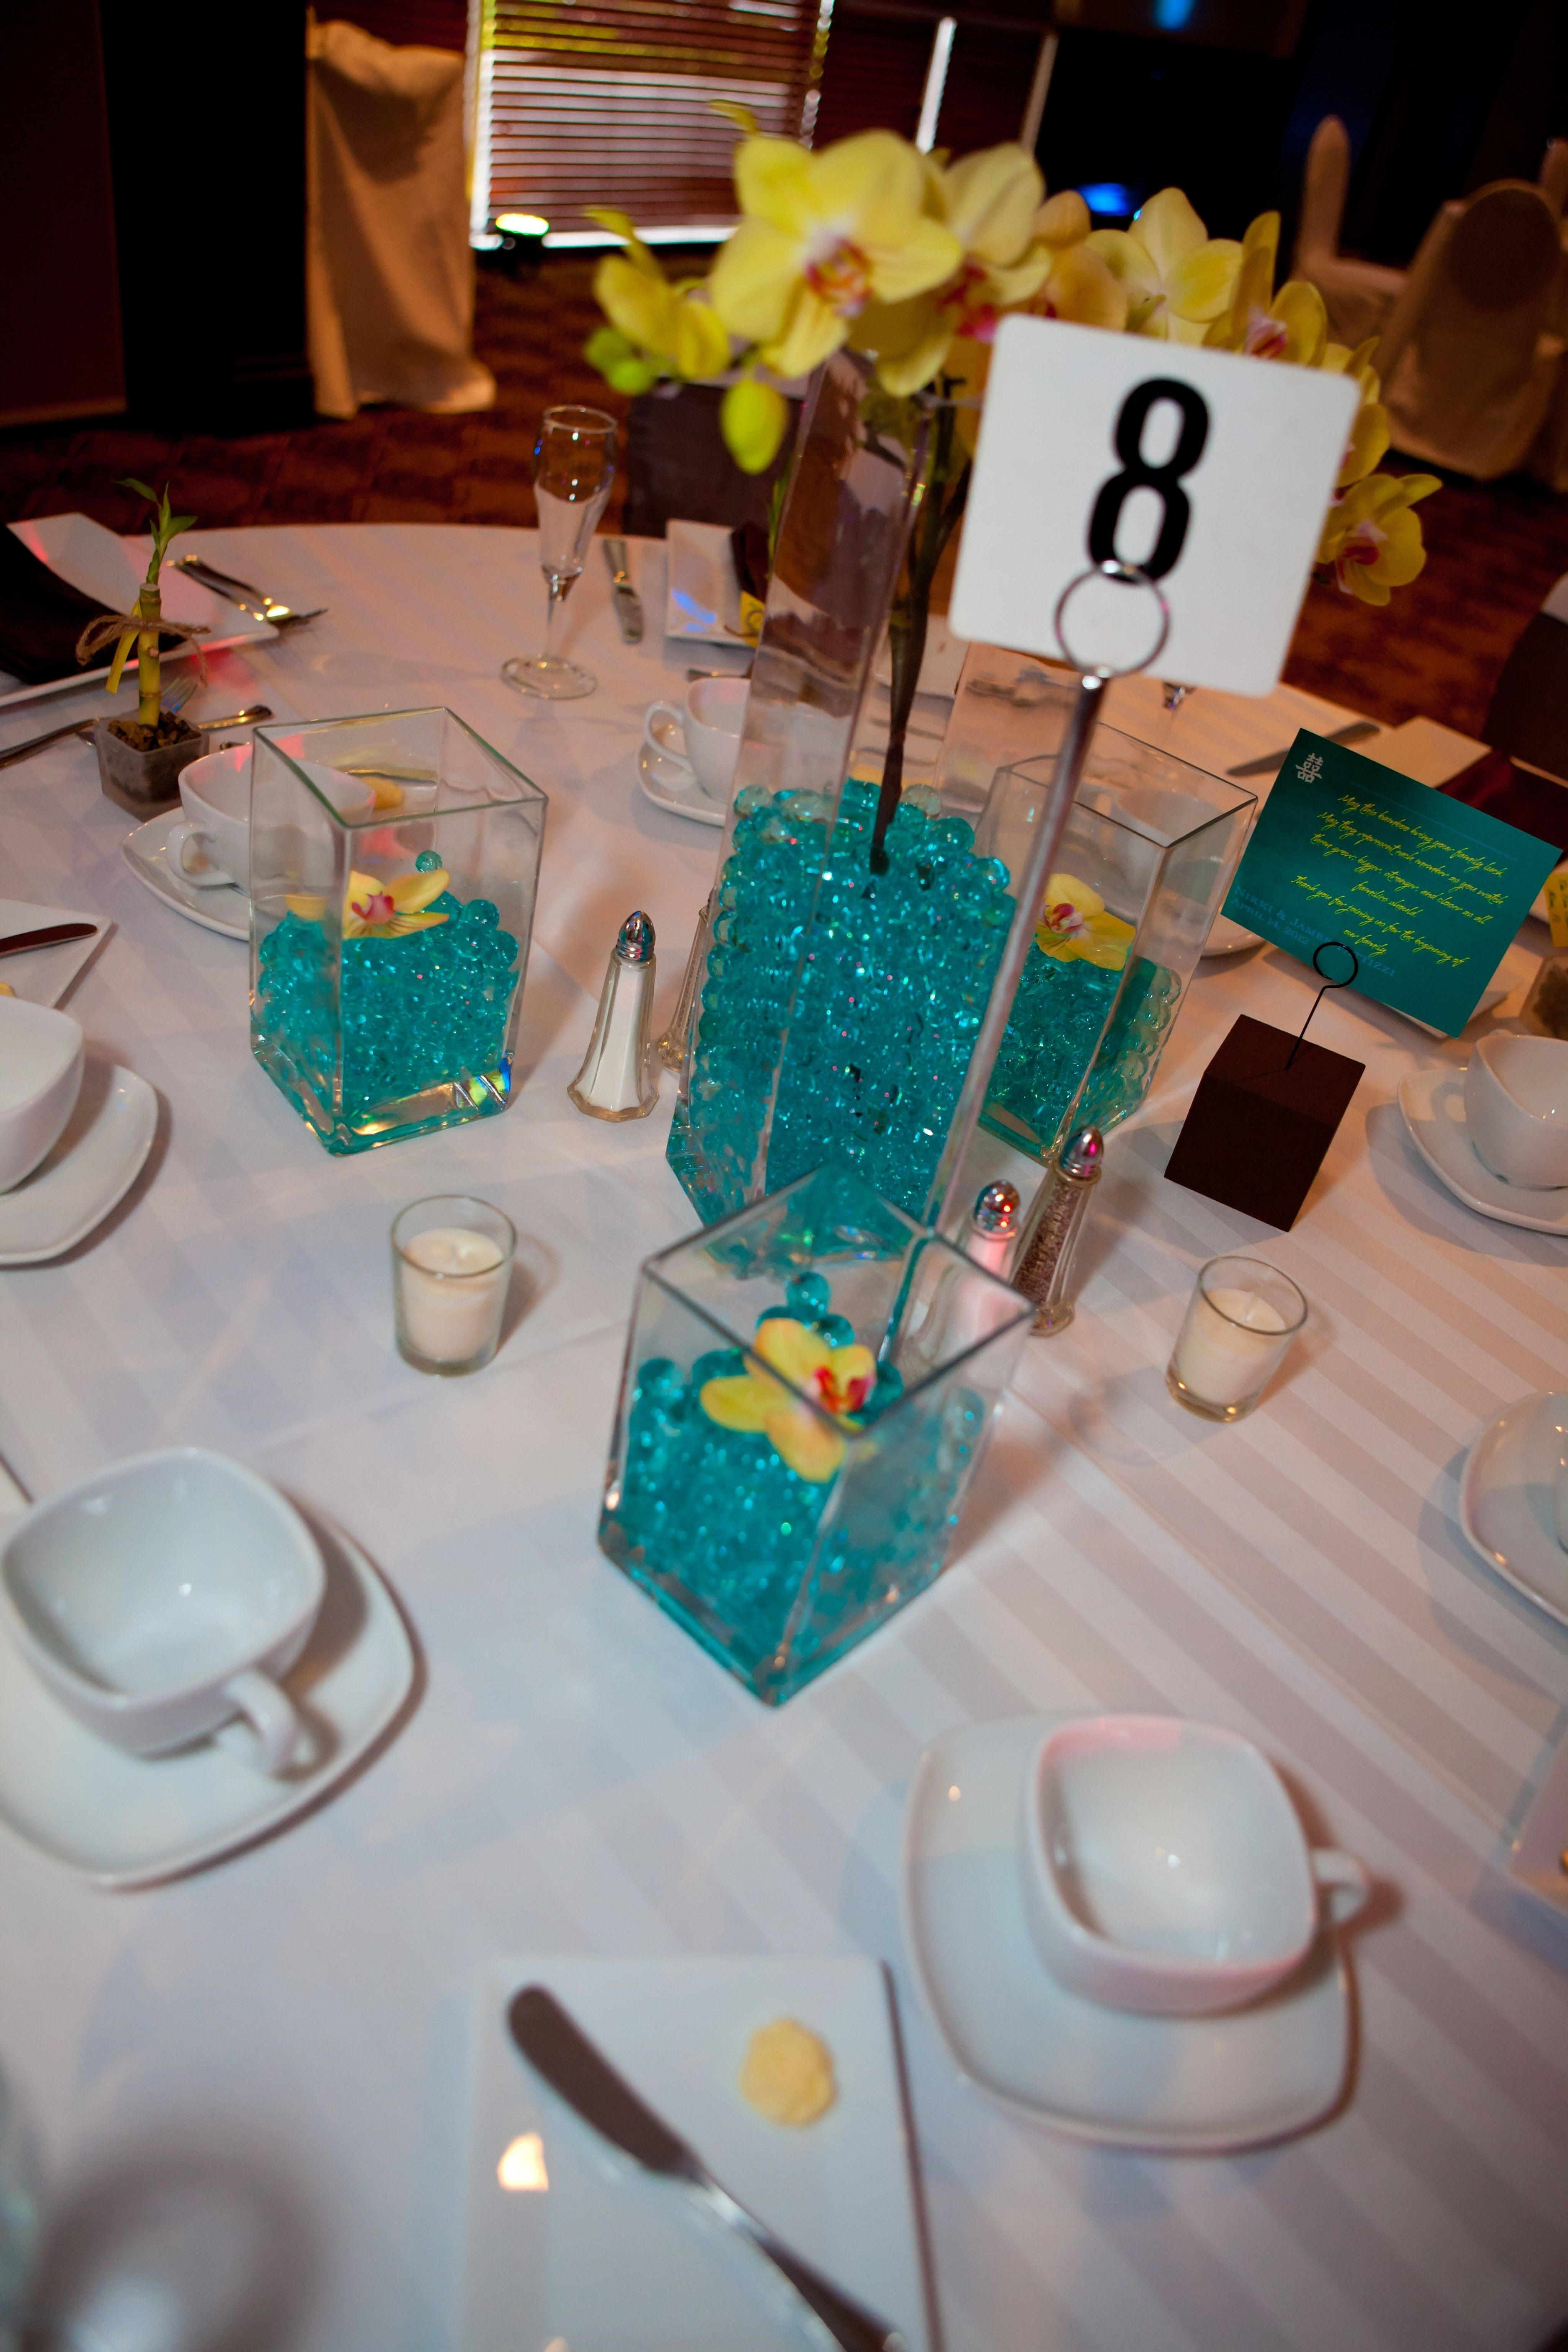 11 Ideal Used Wedding Centerpiece Vases for Sale 2022 free download used wedding centerpiece vases for sale of wedding centerpieces square vases teal water beads yellow for wedding centerpieces square vases teal water beads yellow orchids candles